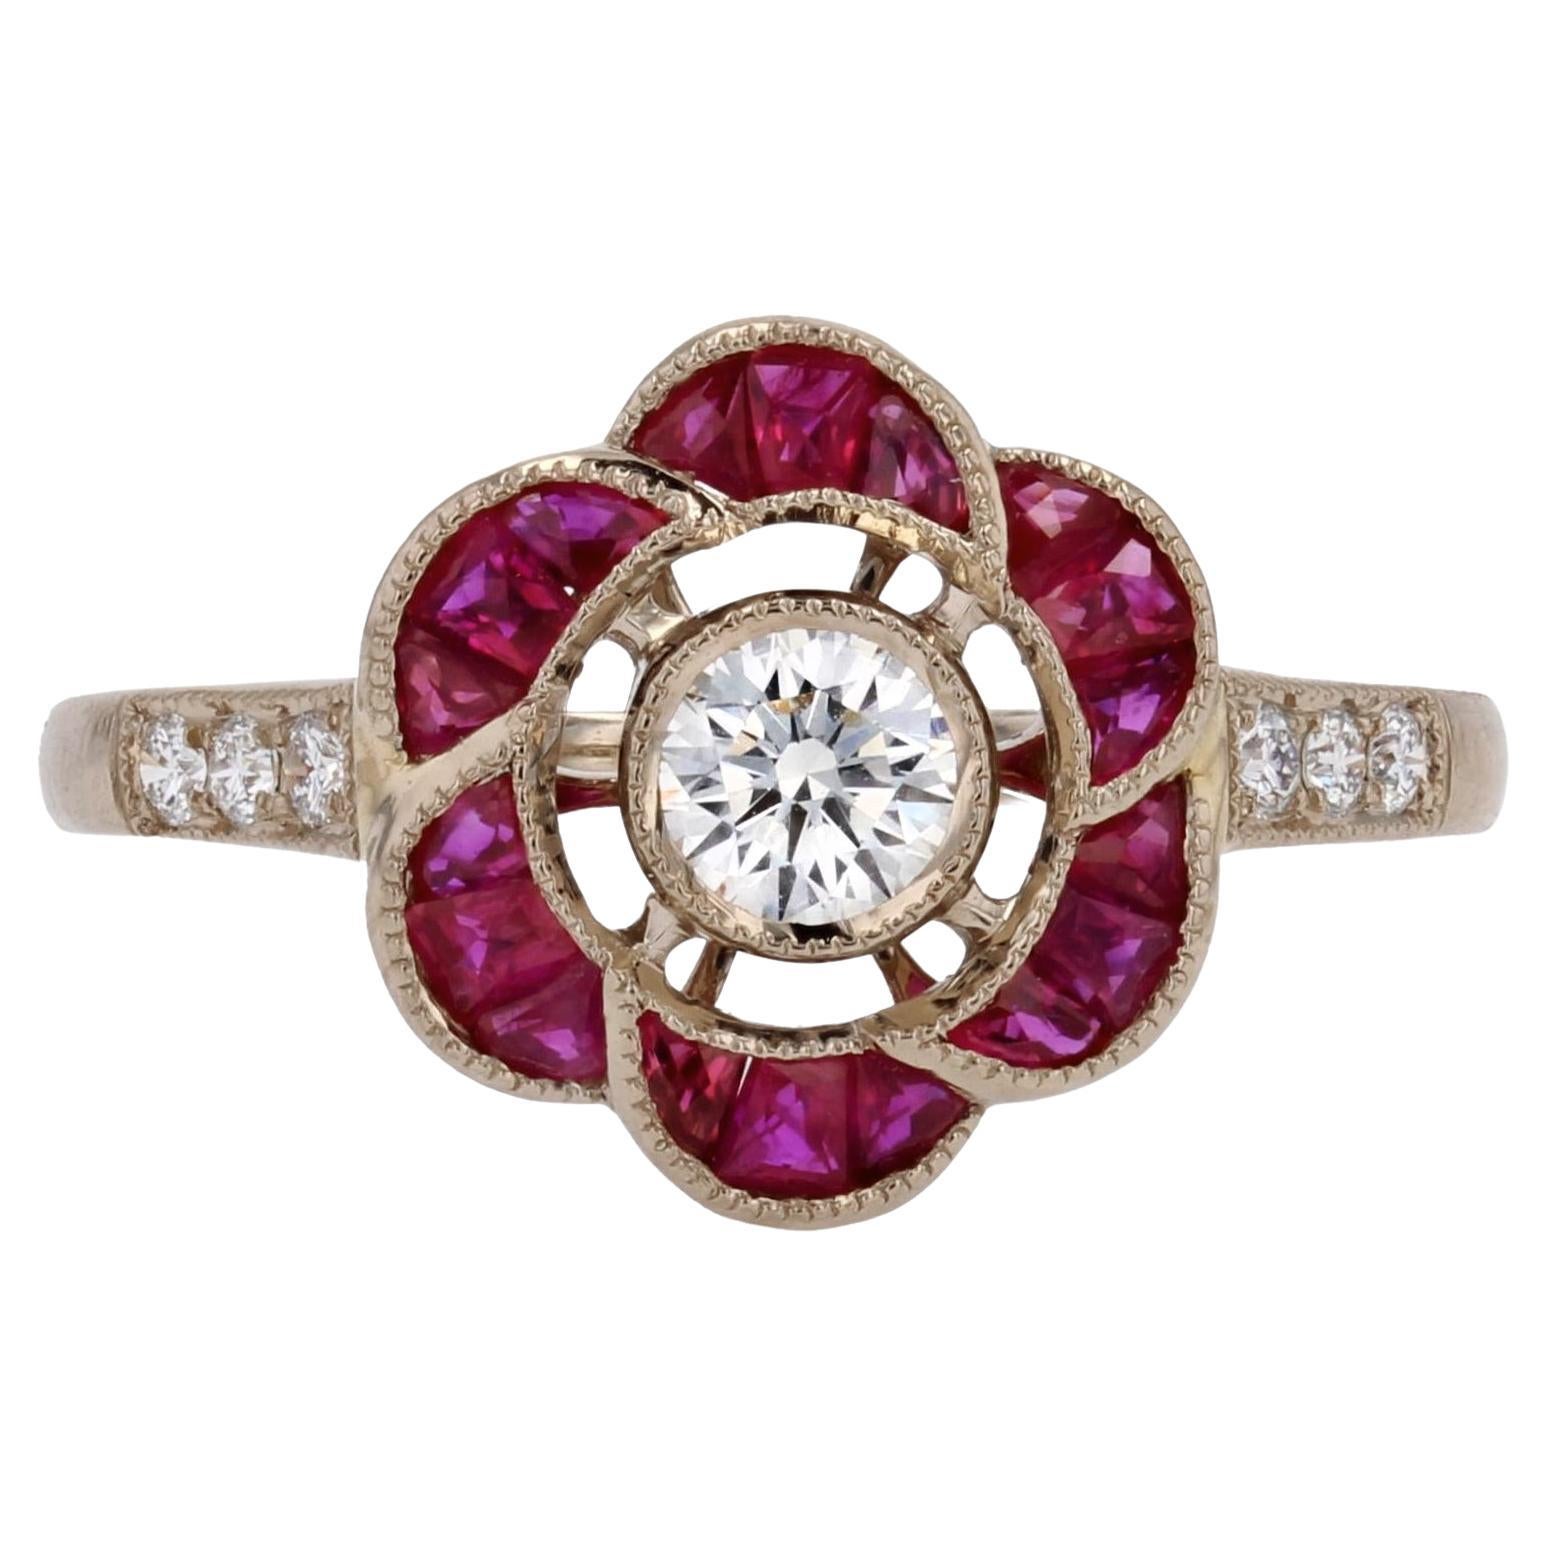 New Art Deco Style Calibrated Rubies Diamonds 18 Karat White Gold Flower Ring For Sale